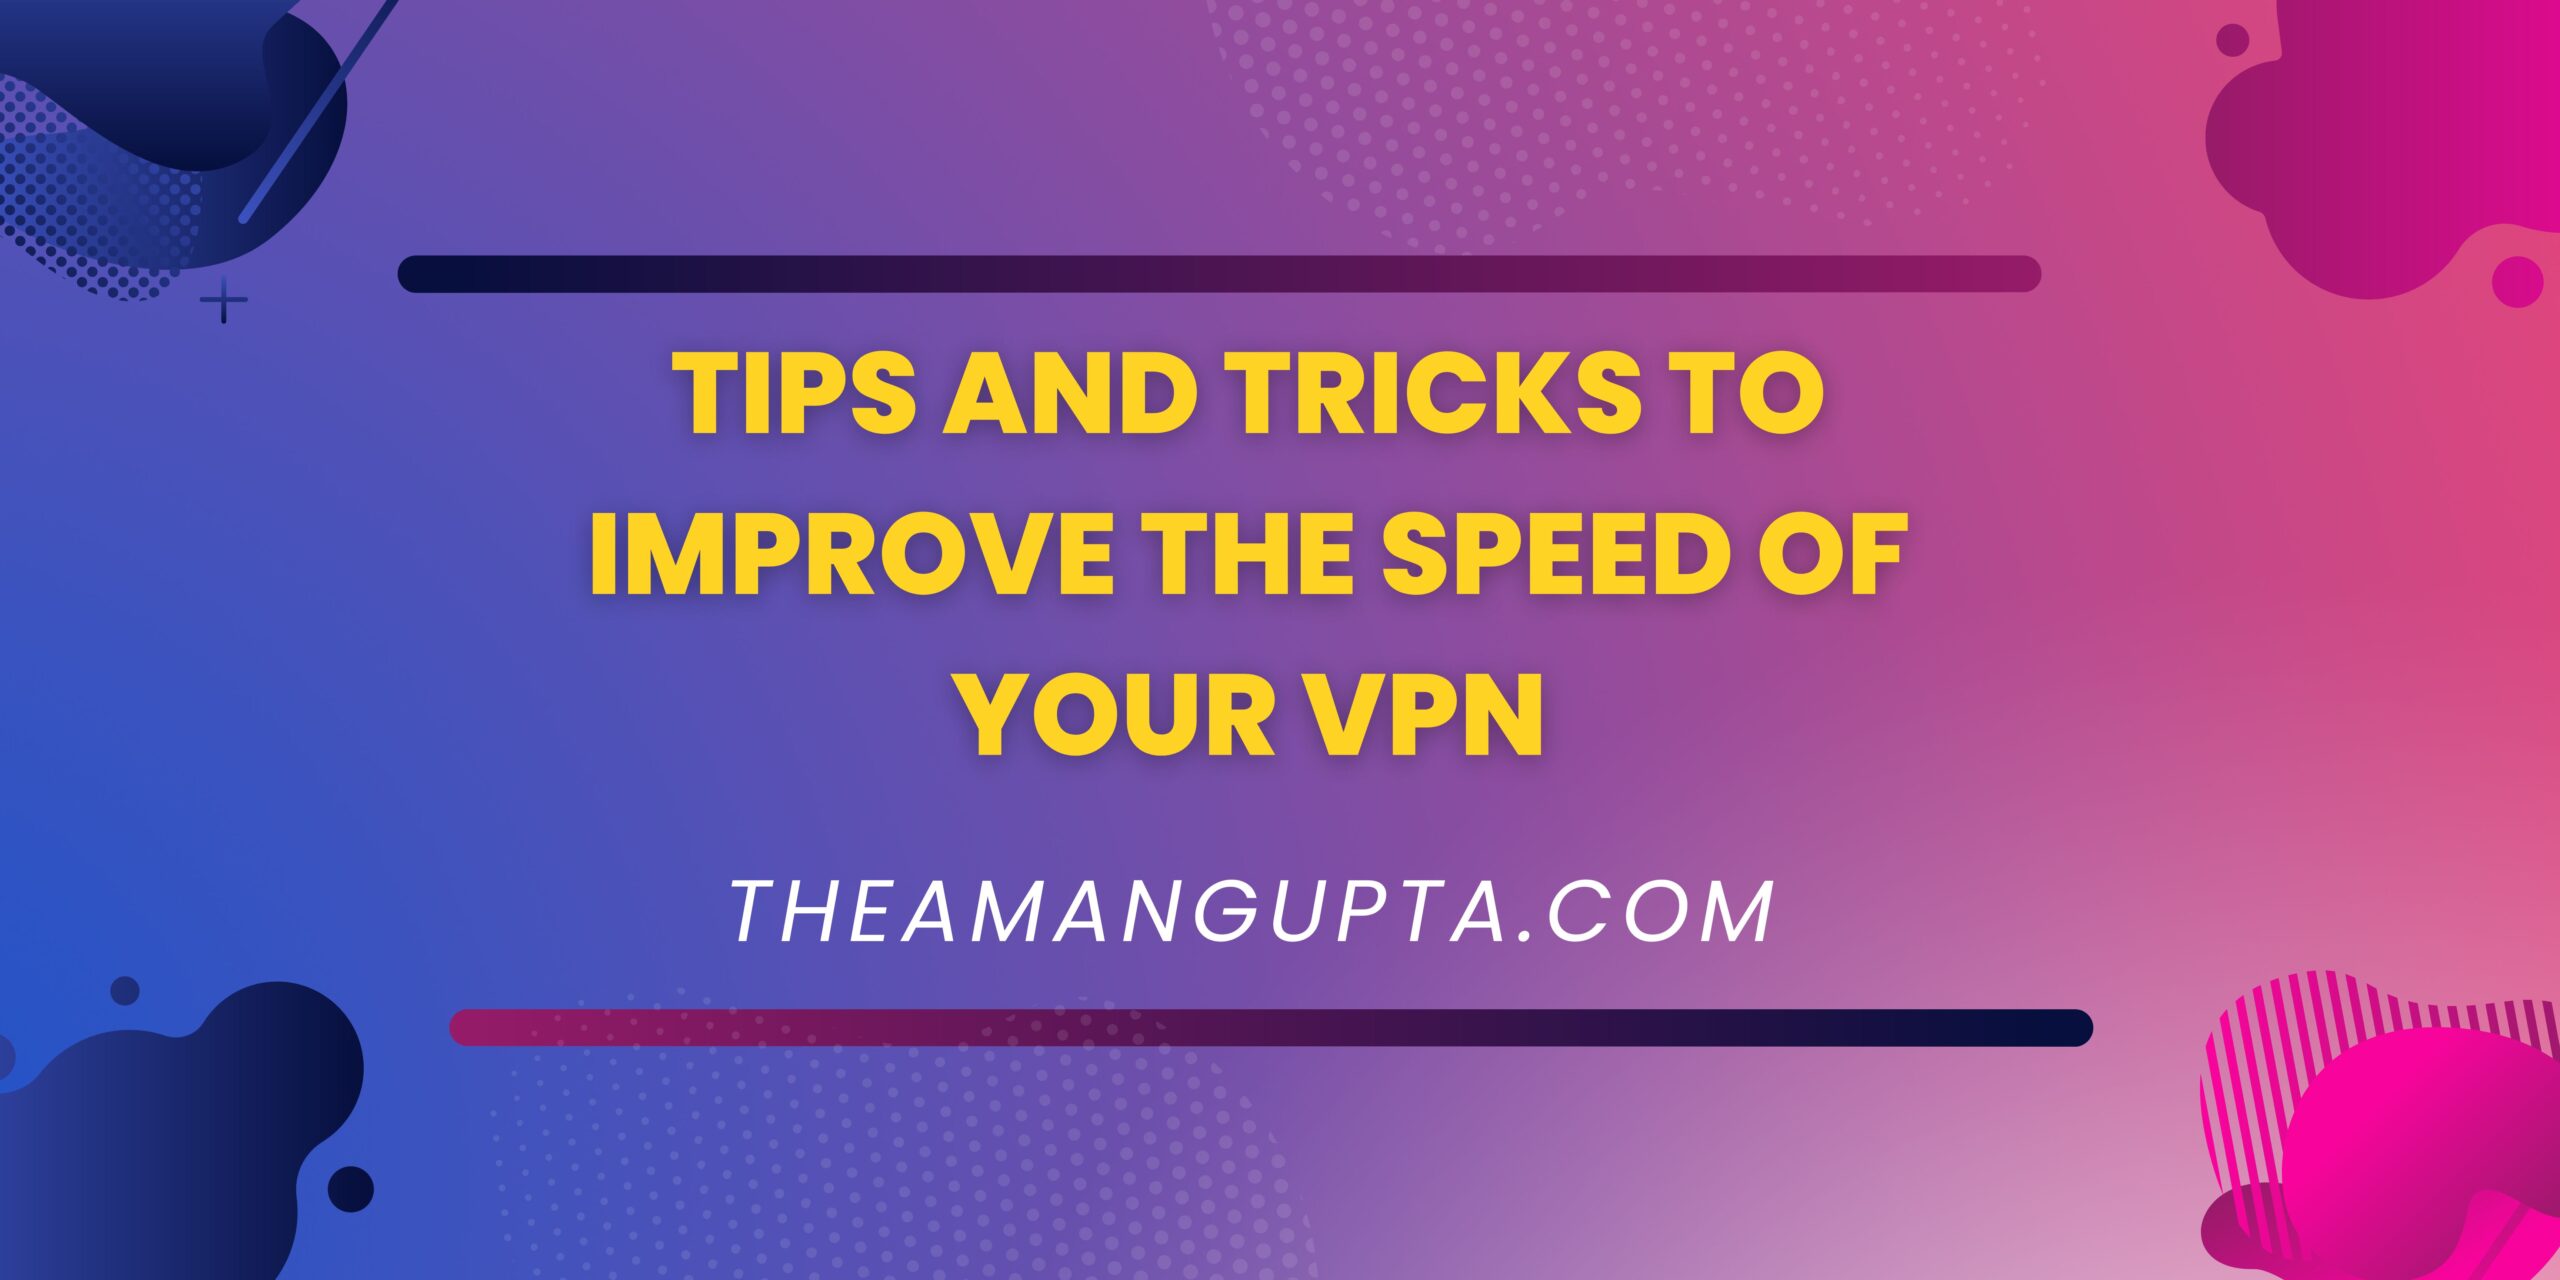 Tips And Tricks To Improve The Speed Of Your VPN|VPN|Theamangupta|Theamangupta